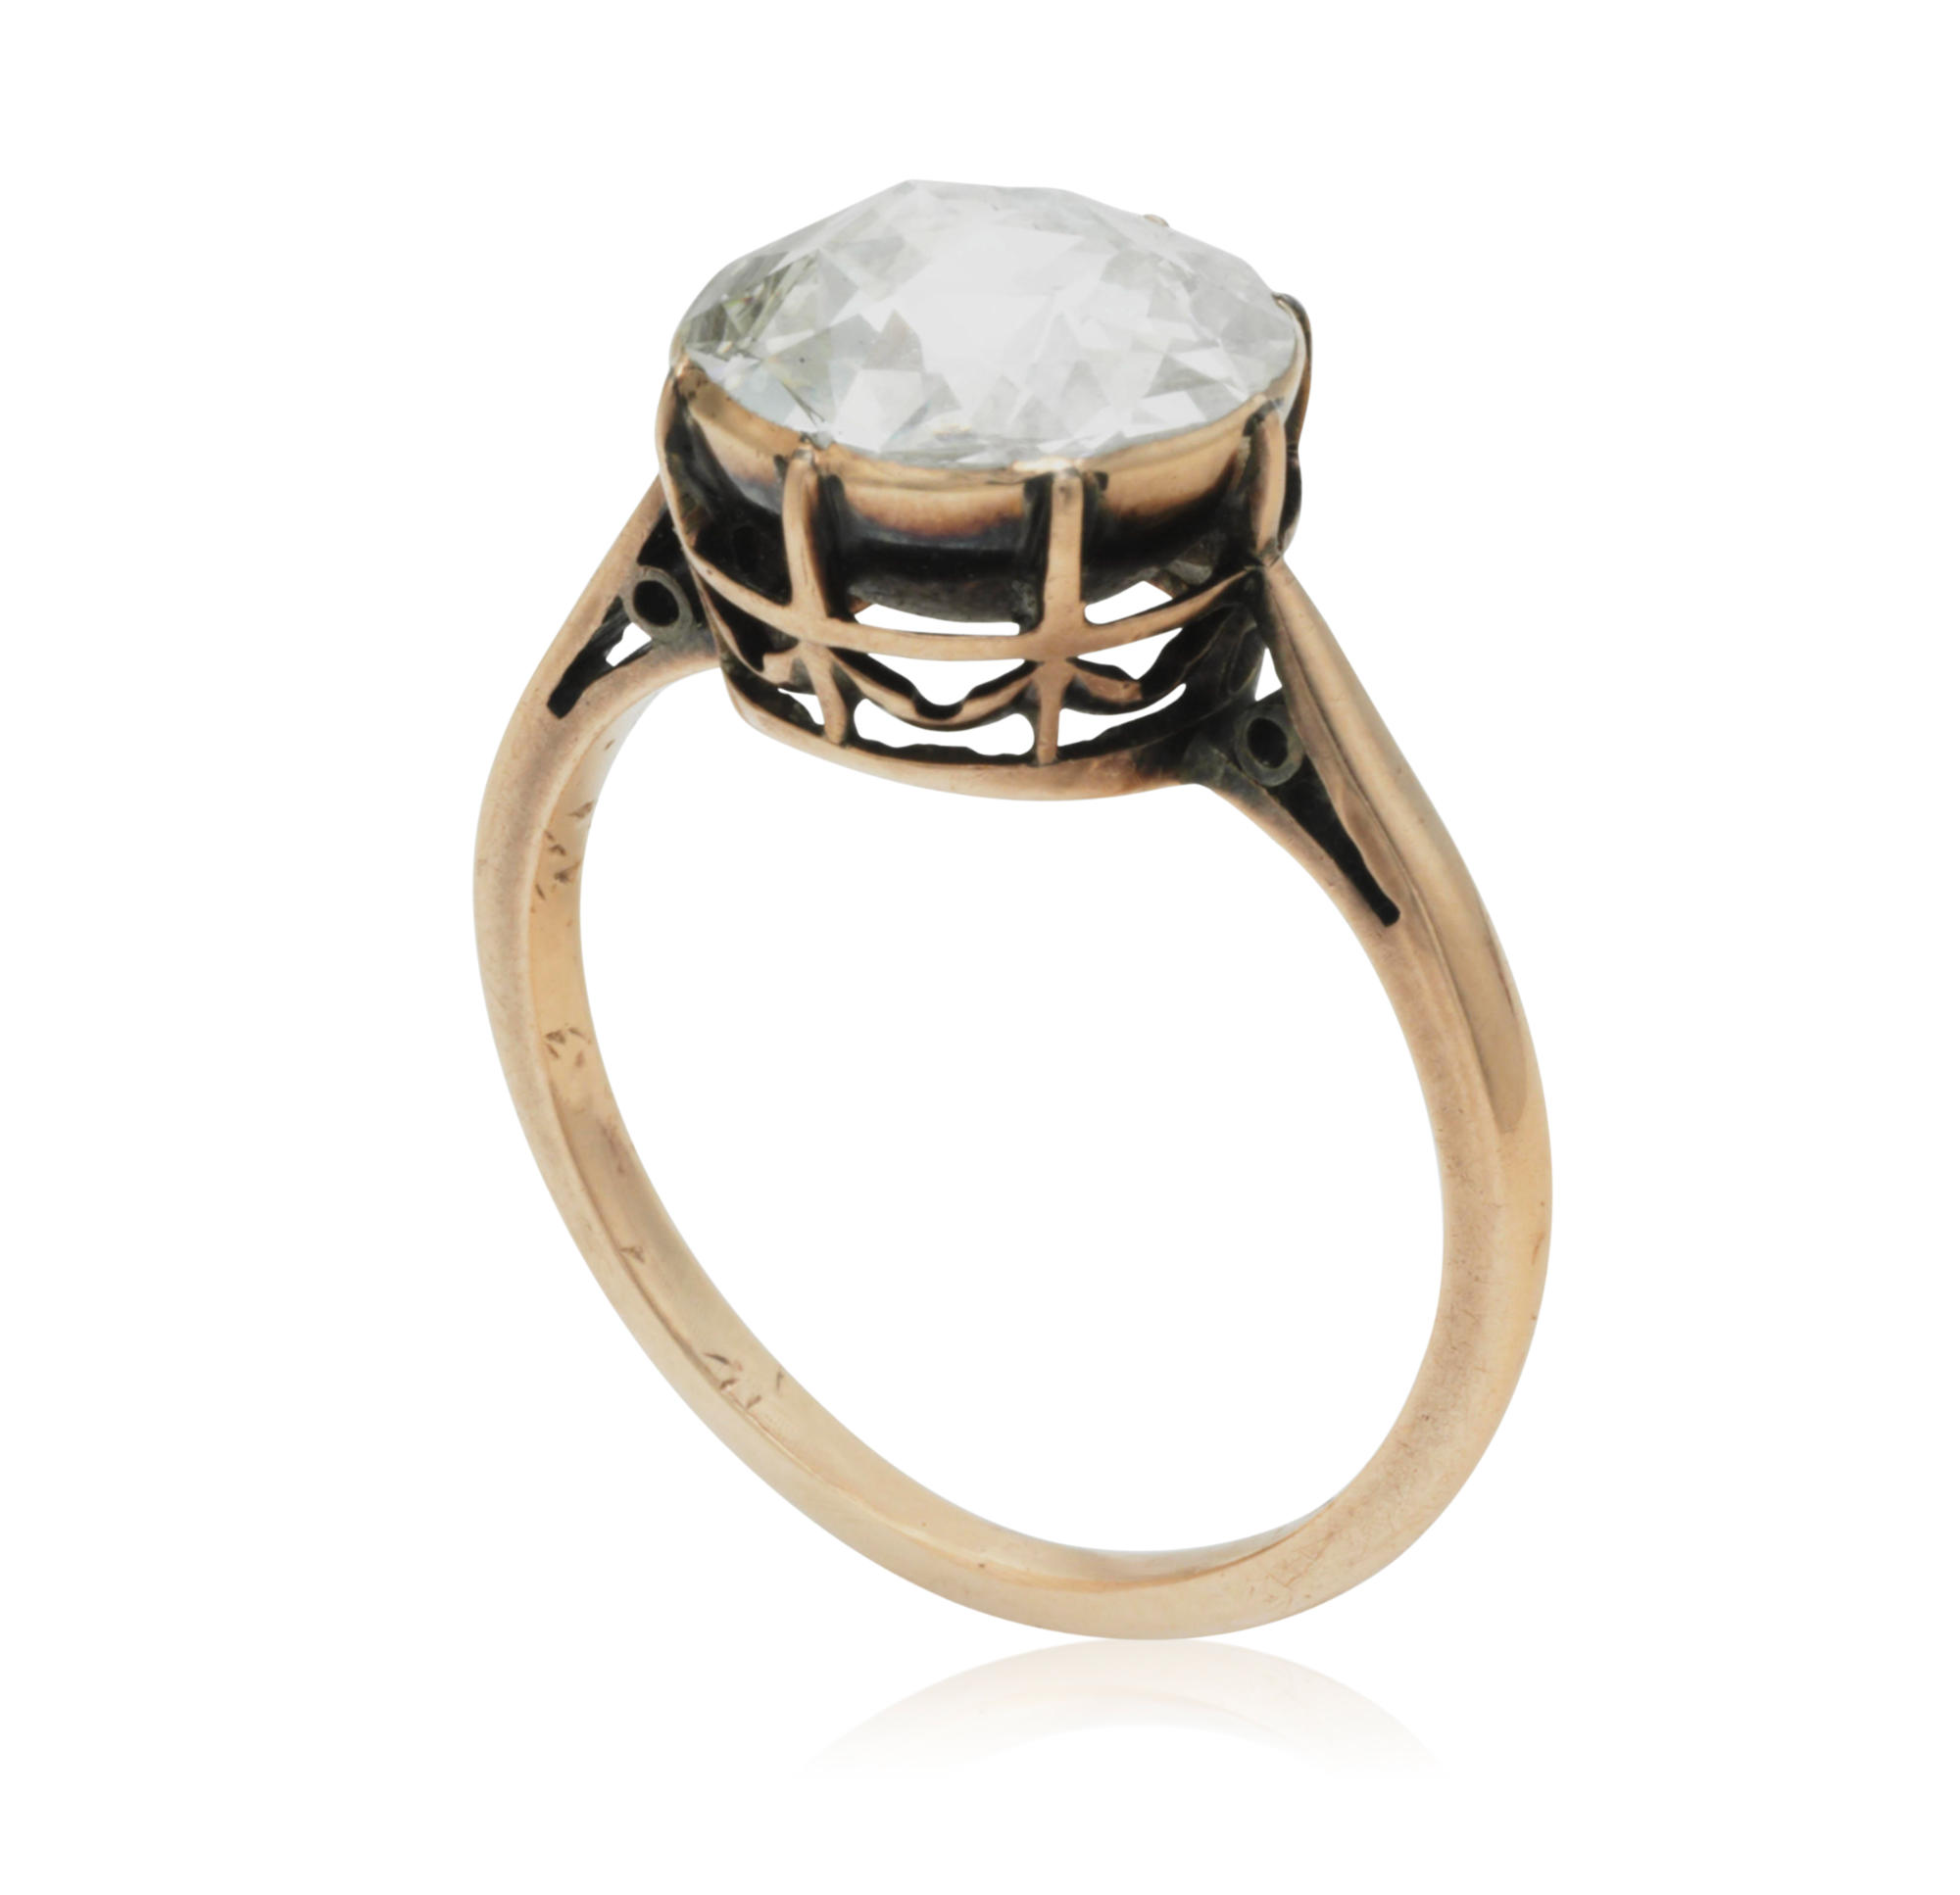 Rose cut diamond ring, sold at Christie Auction in 2018 for $4,375.